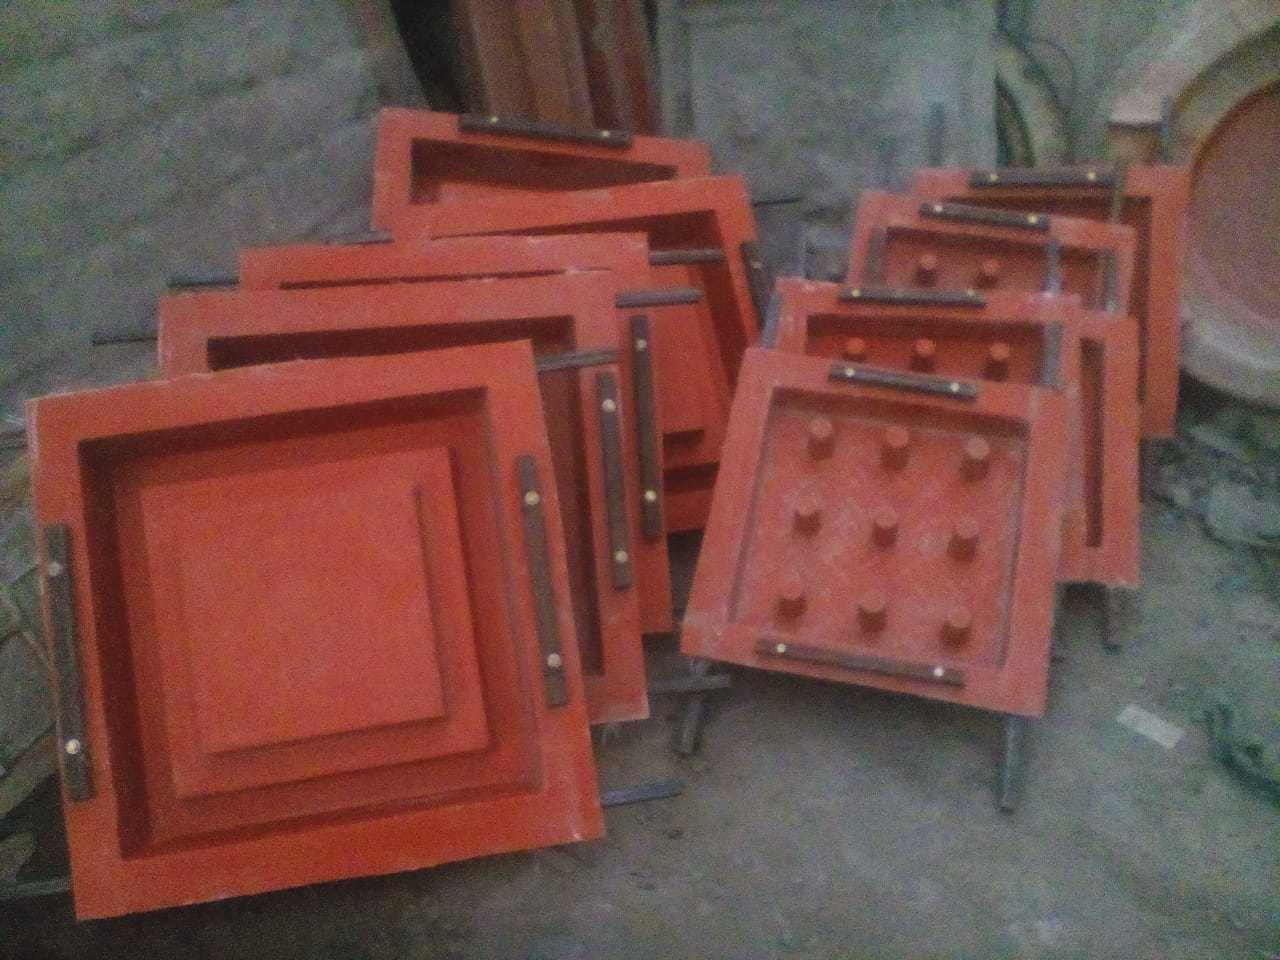 Frp Main Hole Cover Mould